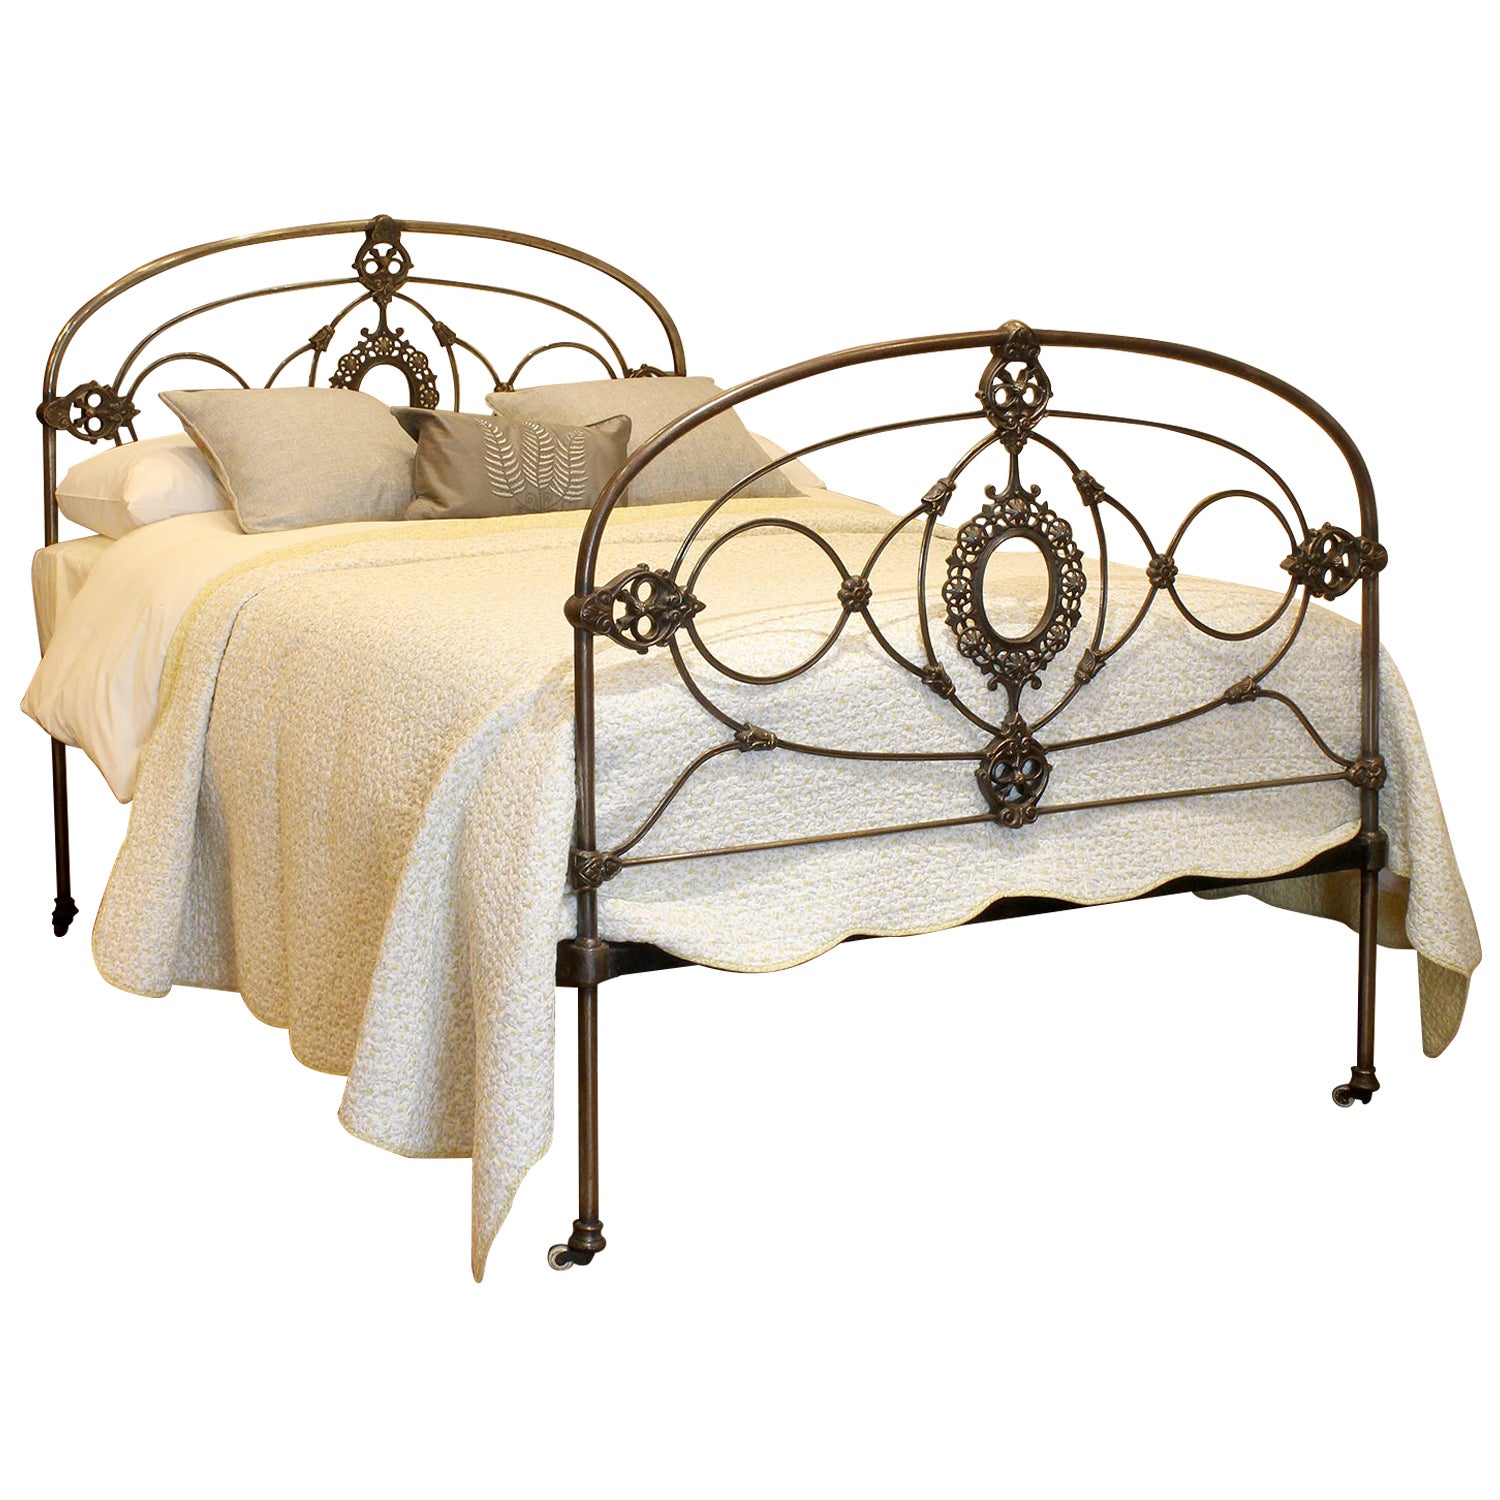 Cast Iron and Steel Antique Bed MD115